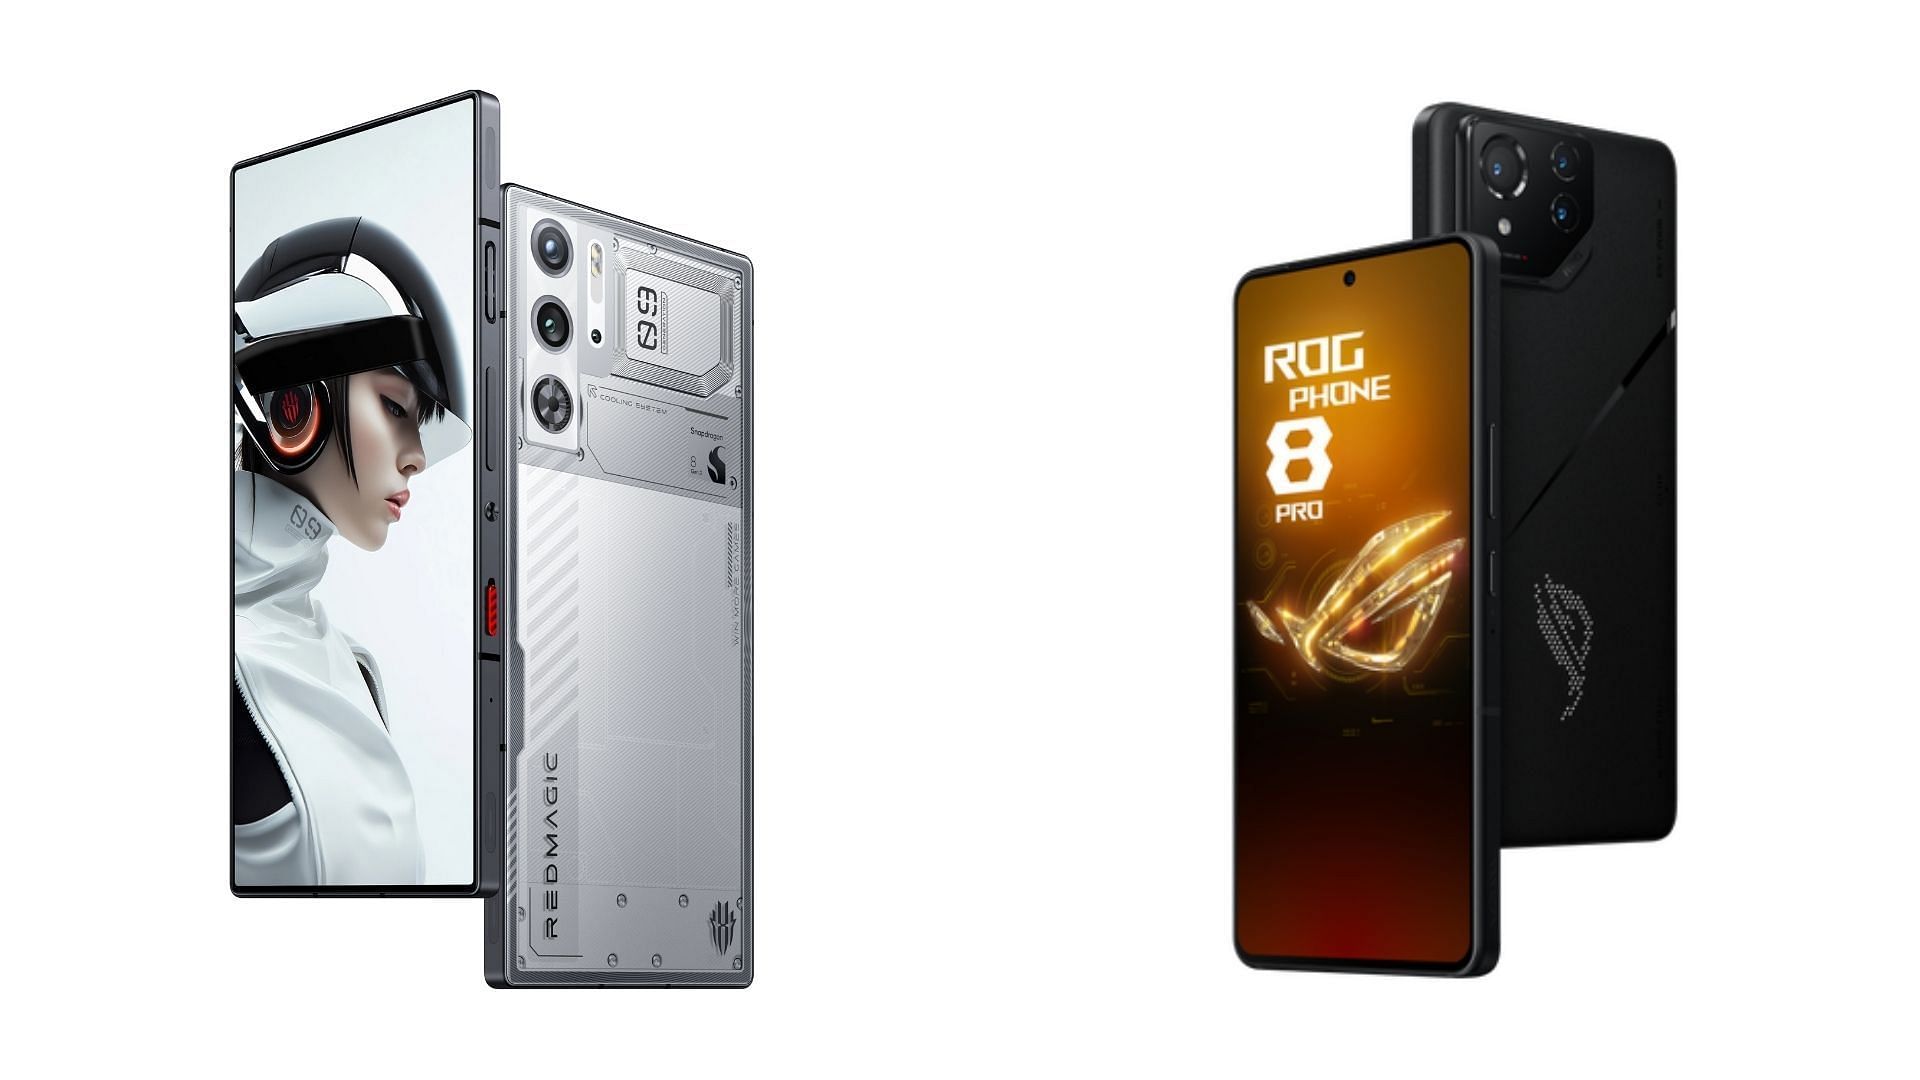 The Redmagic 9 Pro offers 16GB RAM, while the ROG Phone 8 features up to 24GB RAM for power users. (Image via Nubia || Asus)